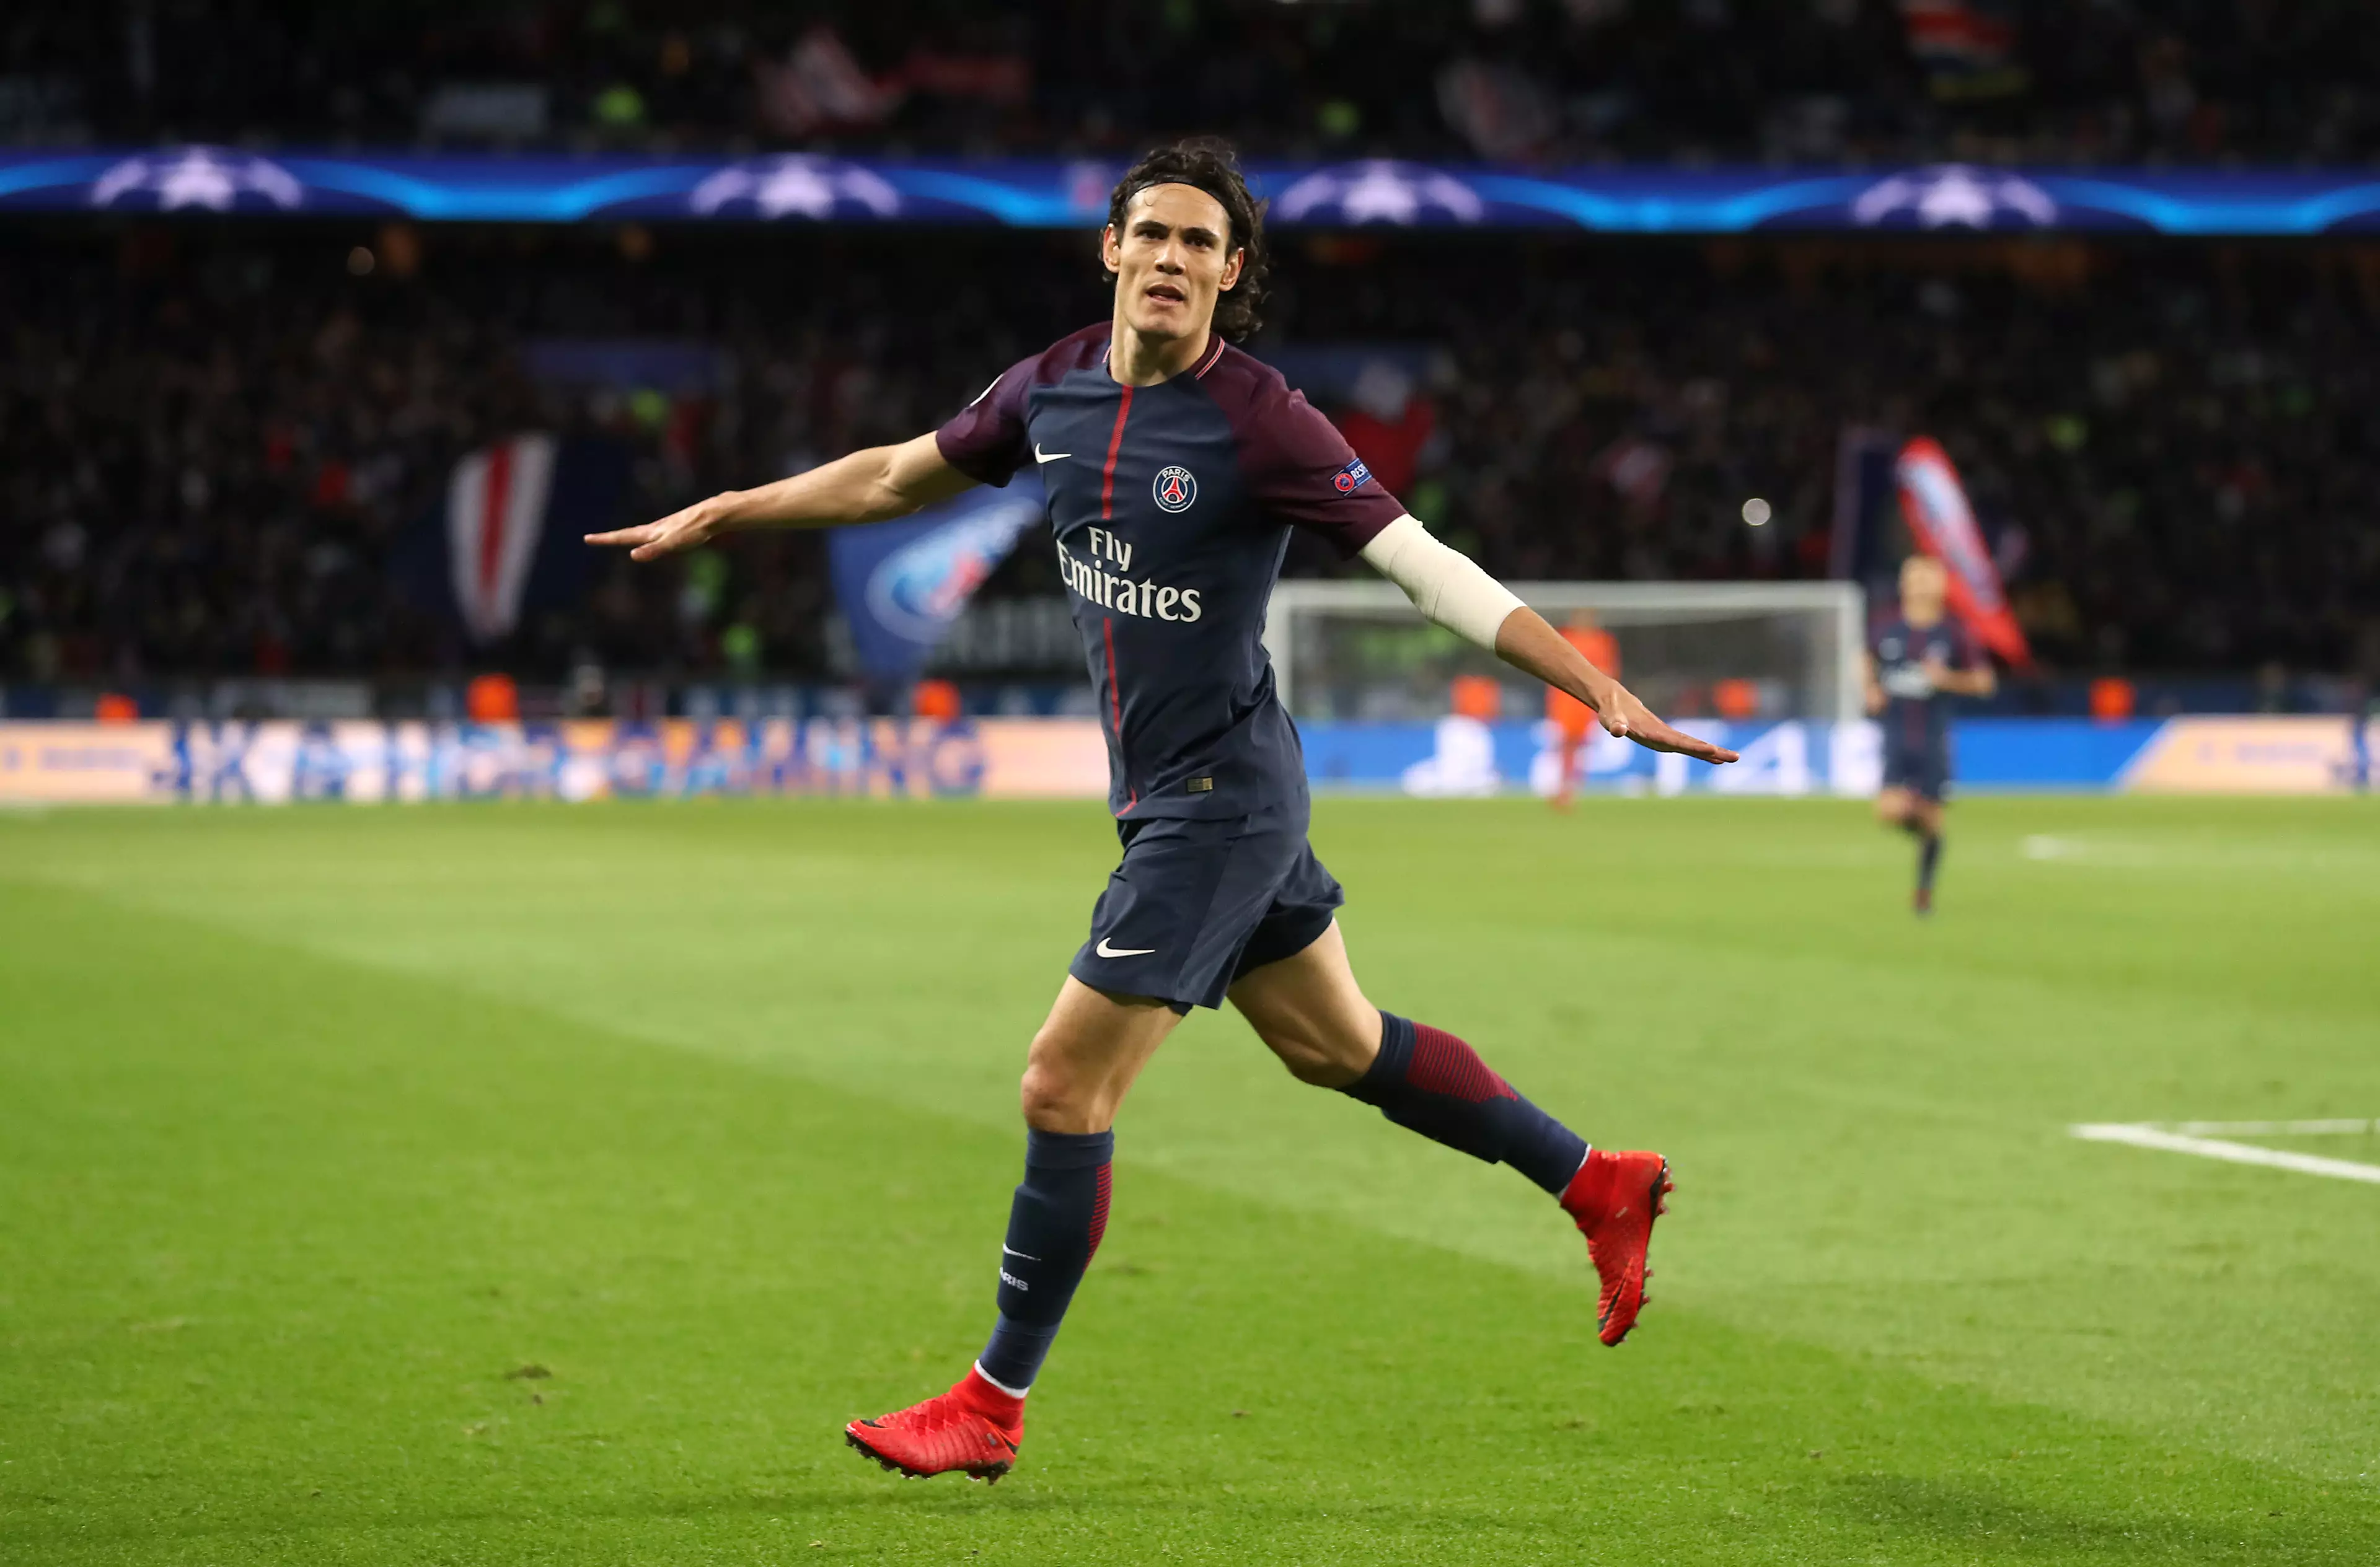 Cavani has been a consistent scorer throughout his career. Image: PA Images